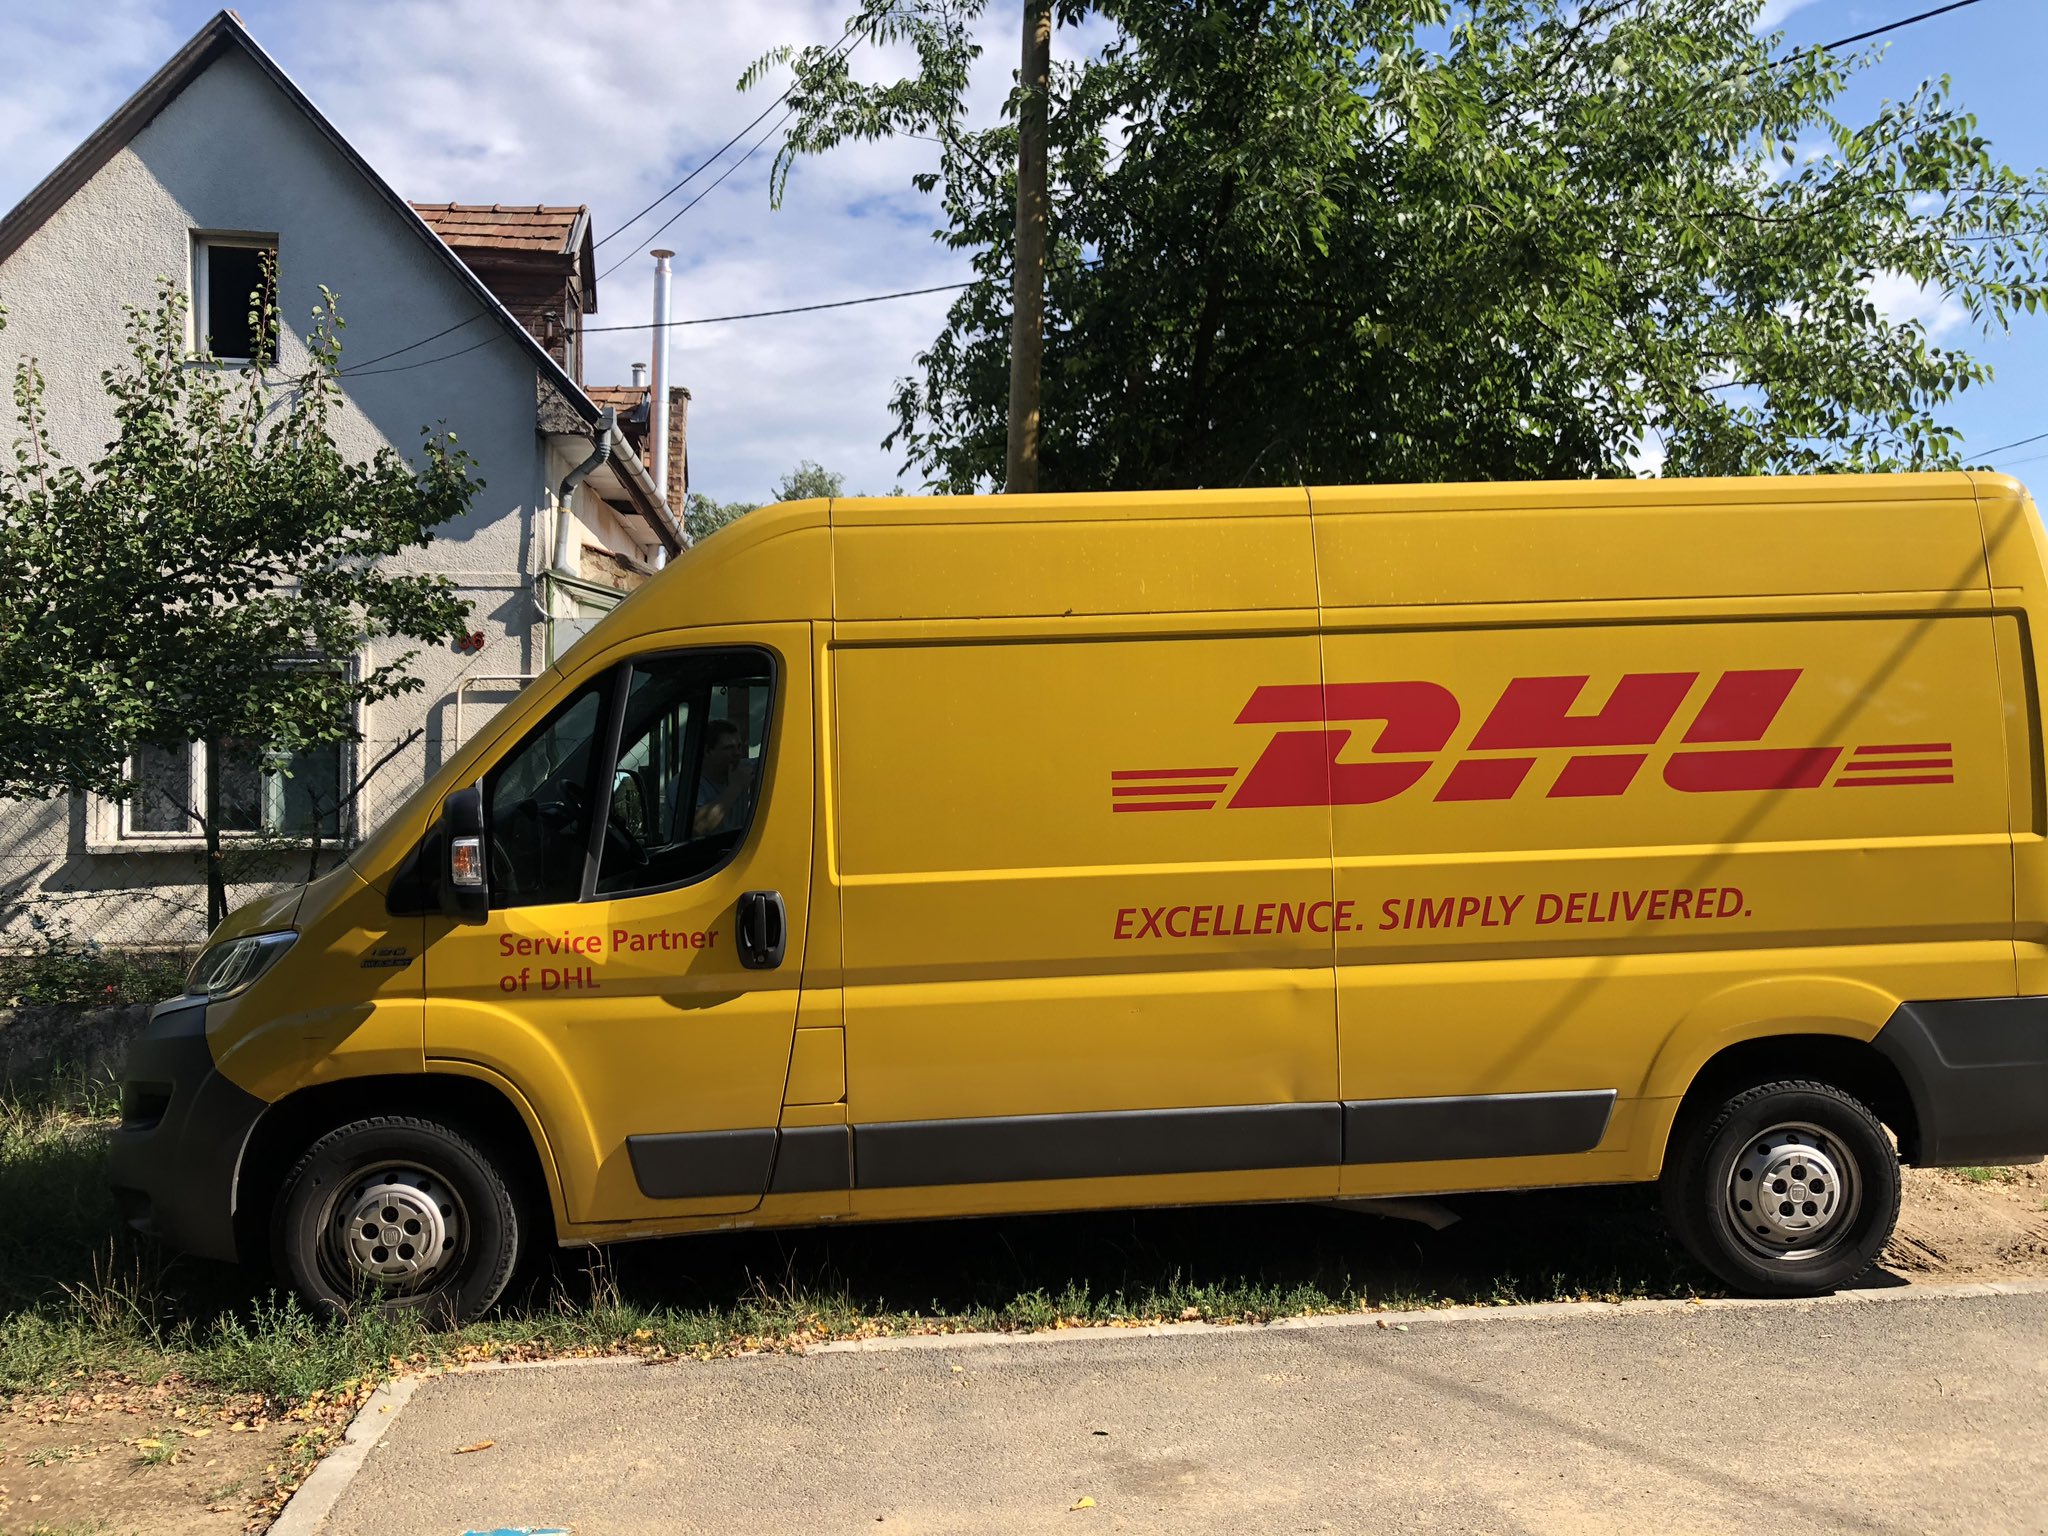 Courier Enters DHL Yellow Delivery Van After Delivering The